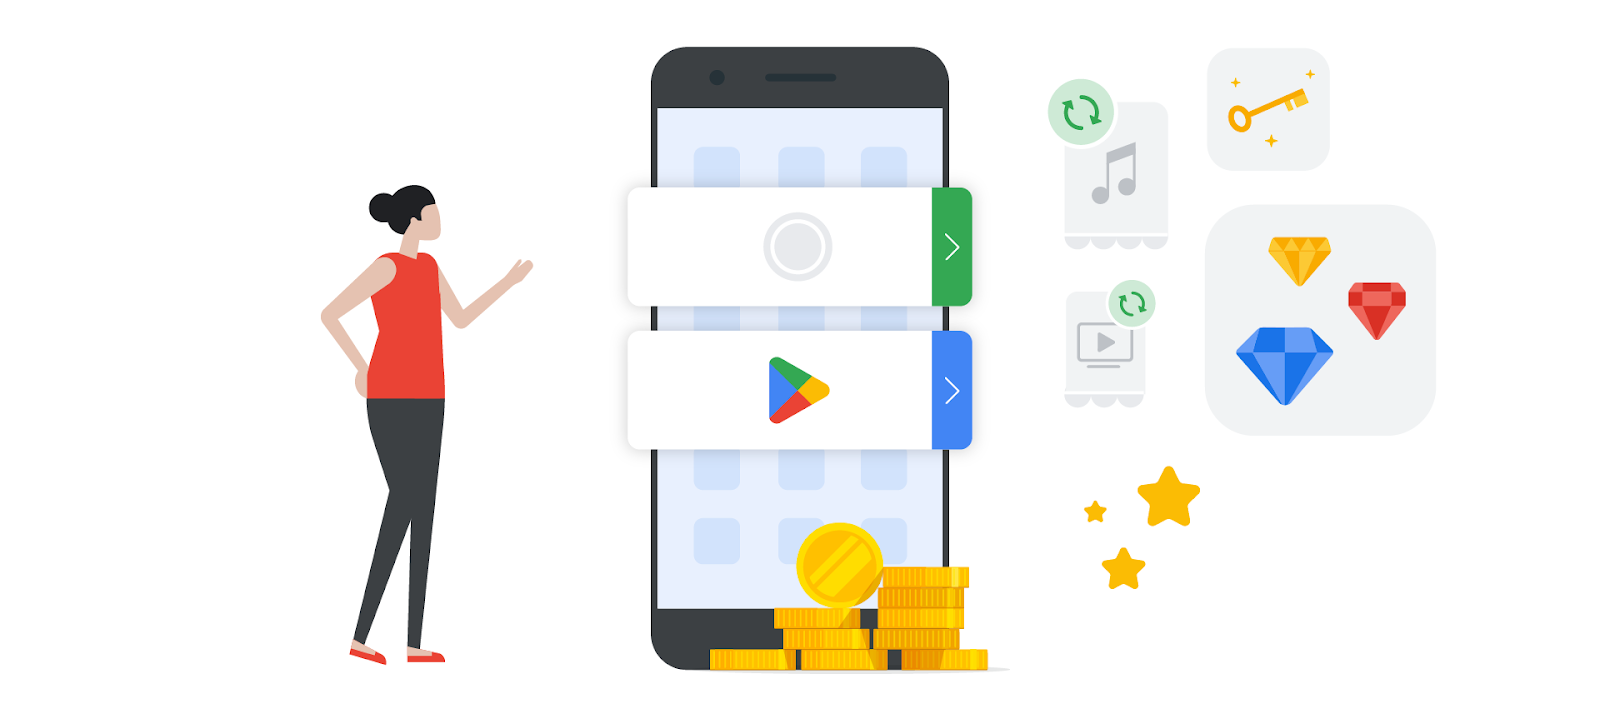 Illustration of a woman standing in front of a large phone with Google Play logo prominently featured. At her feet are stacks of coins. To the right of the phone are icons for music, video, a key, gems, and stars